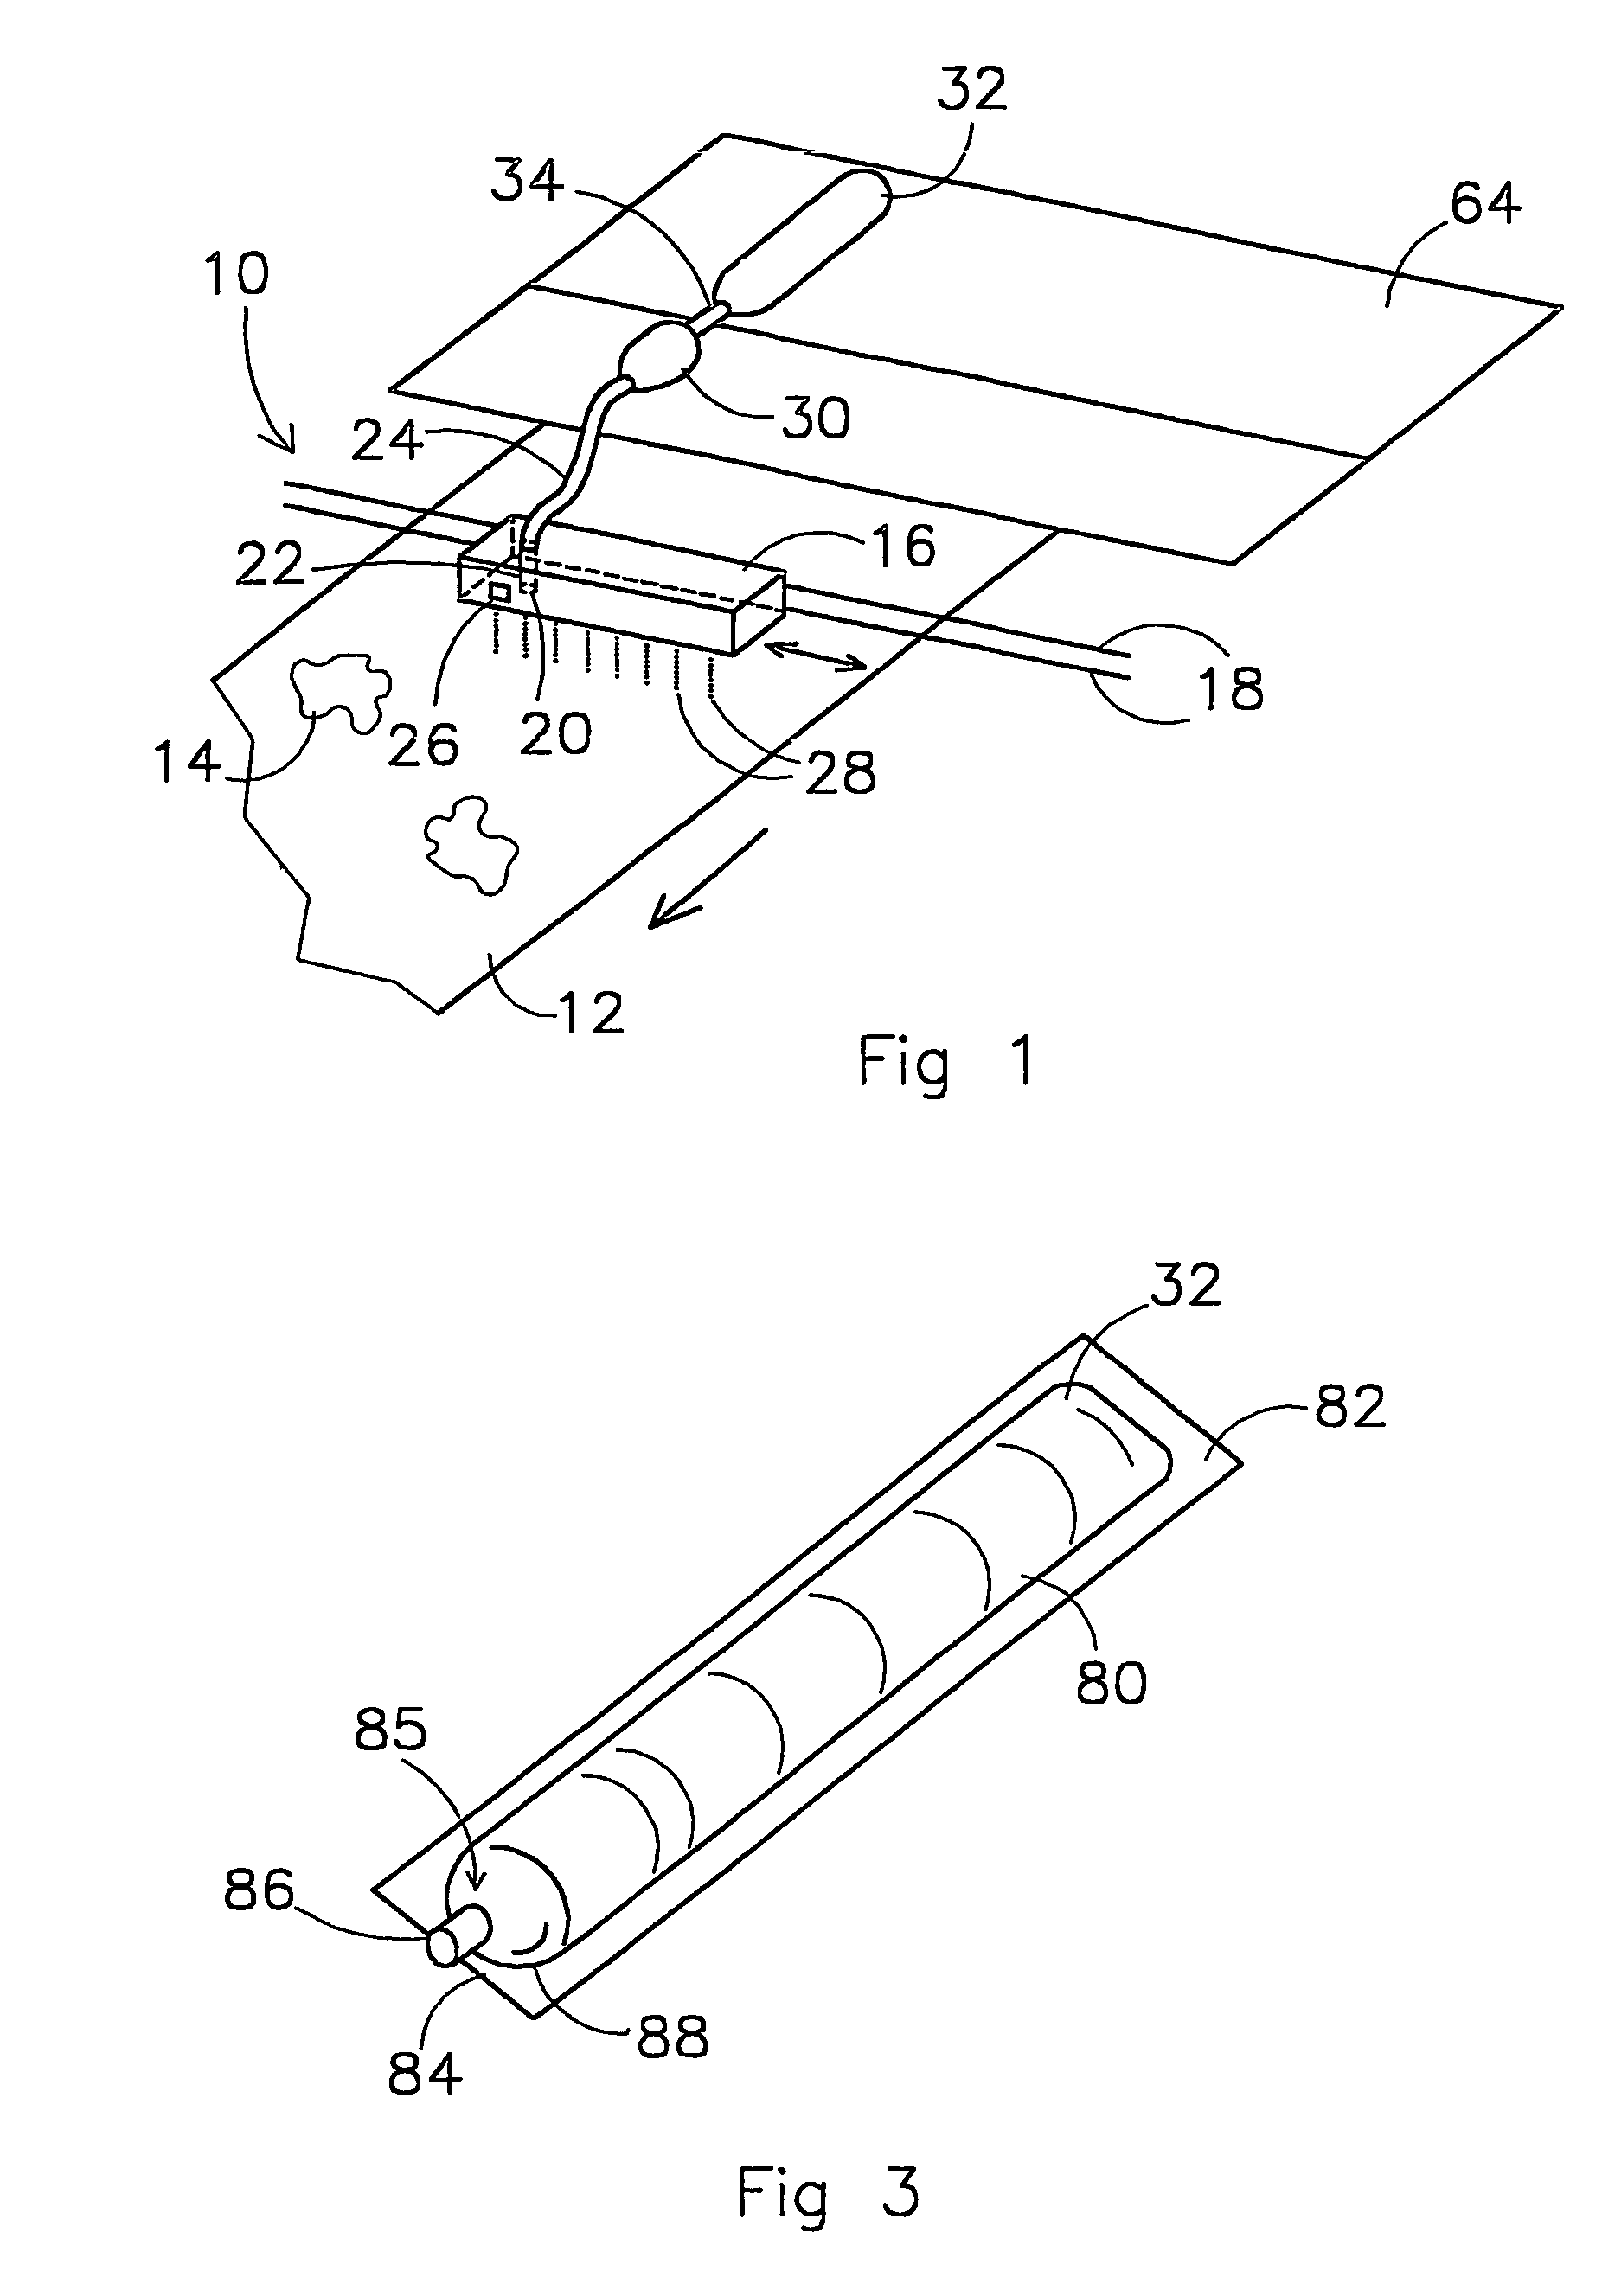 Printing device, flexible reservoir and working container and feed system